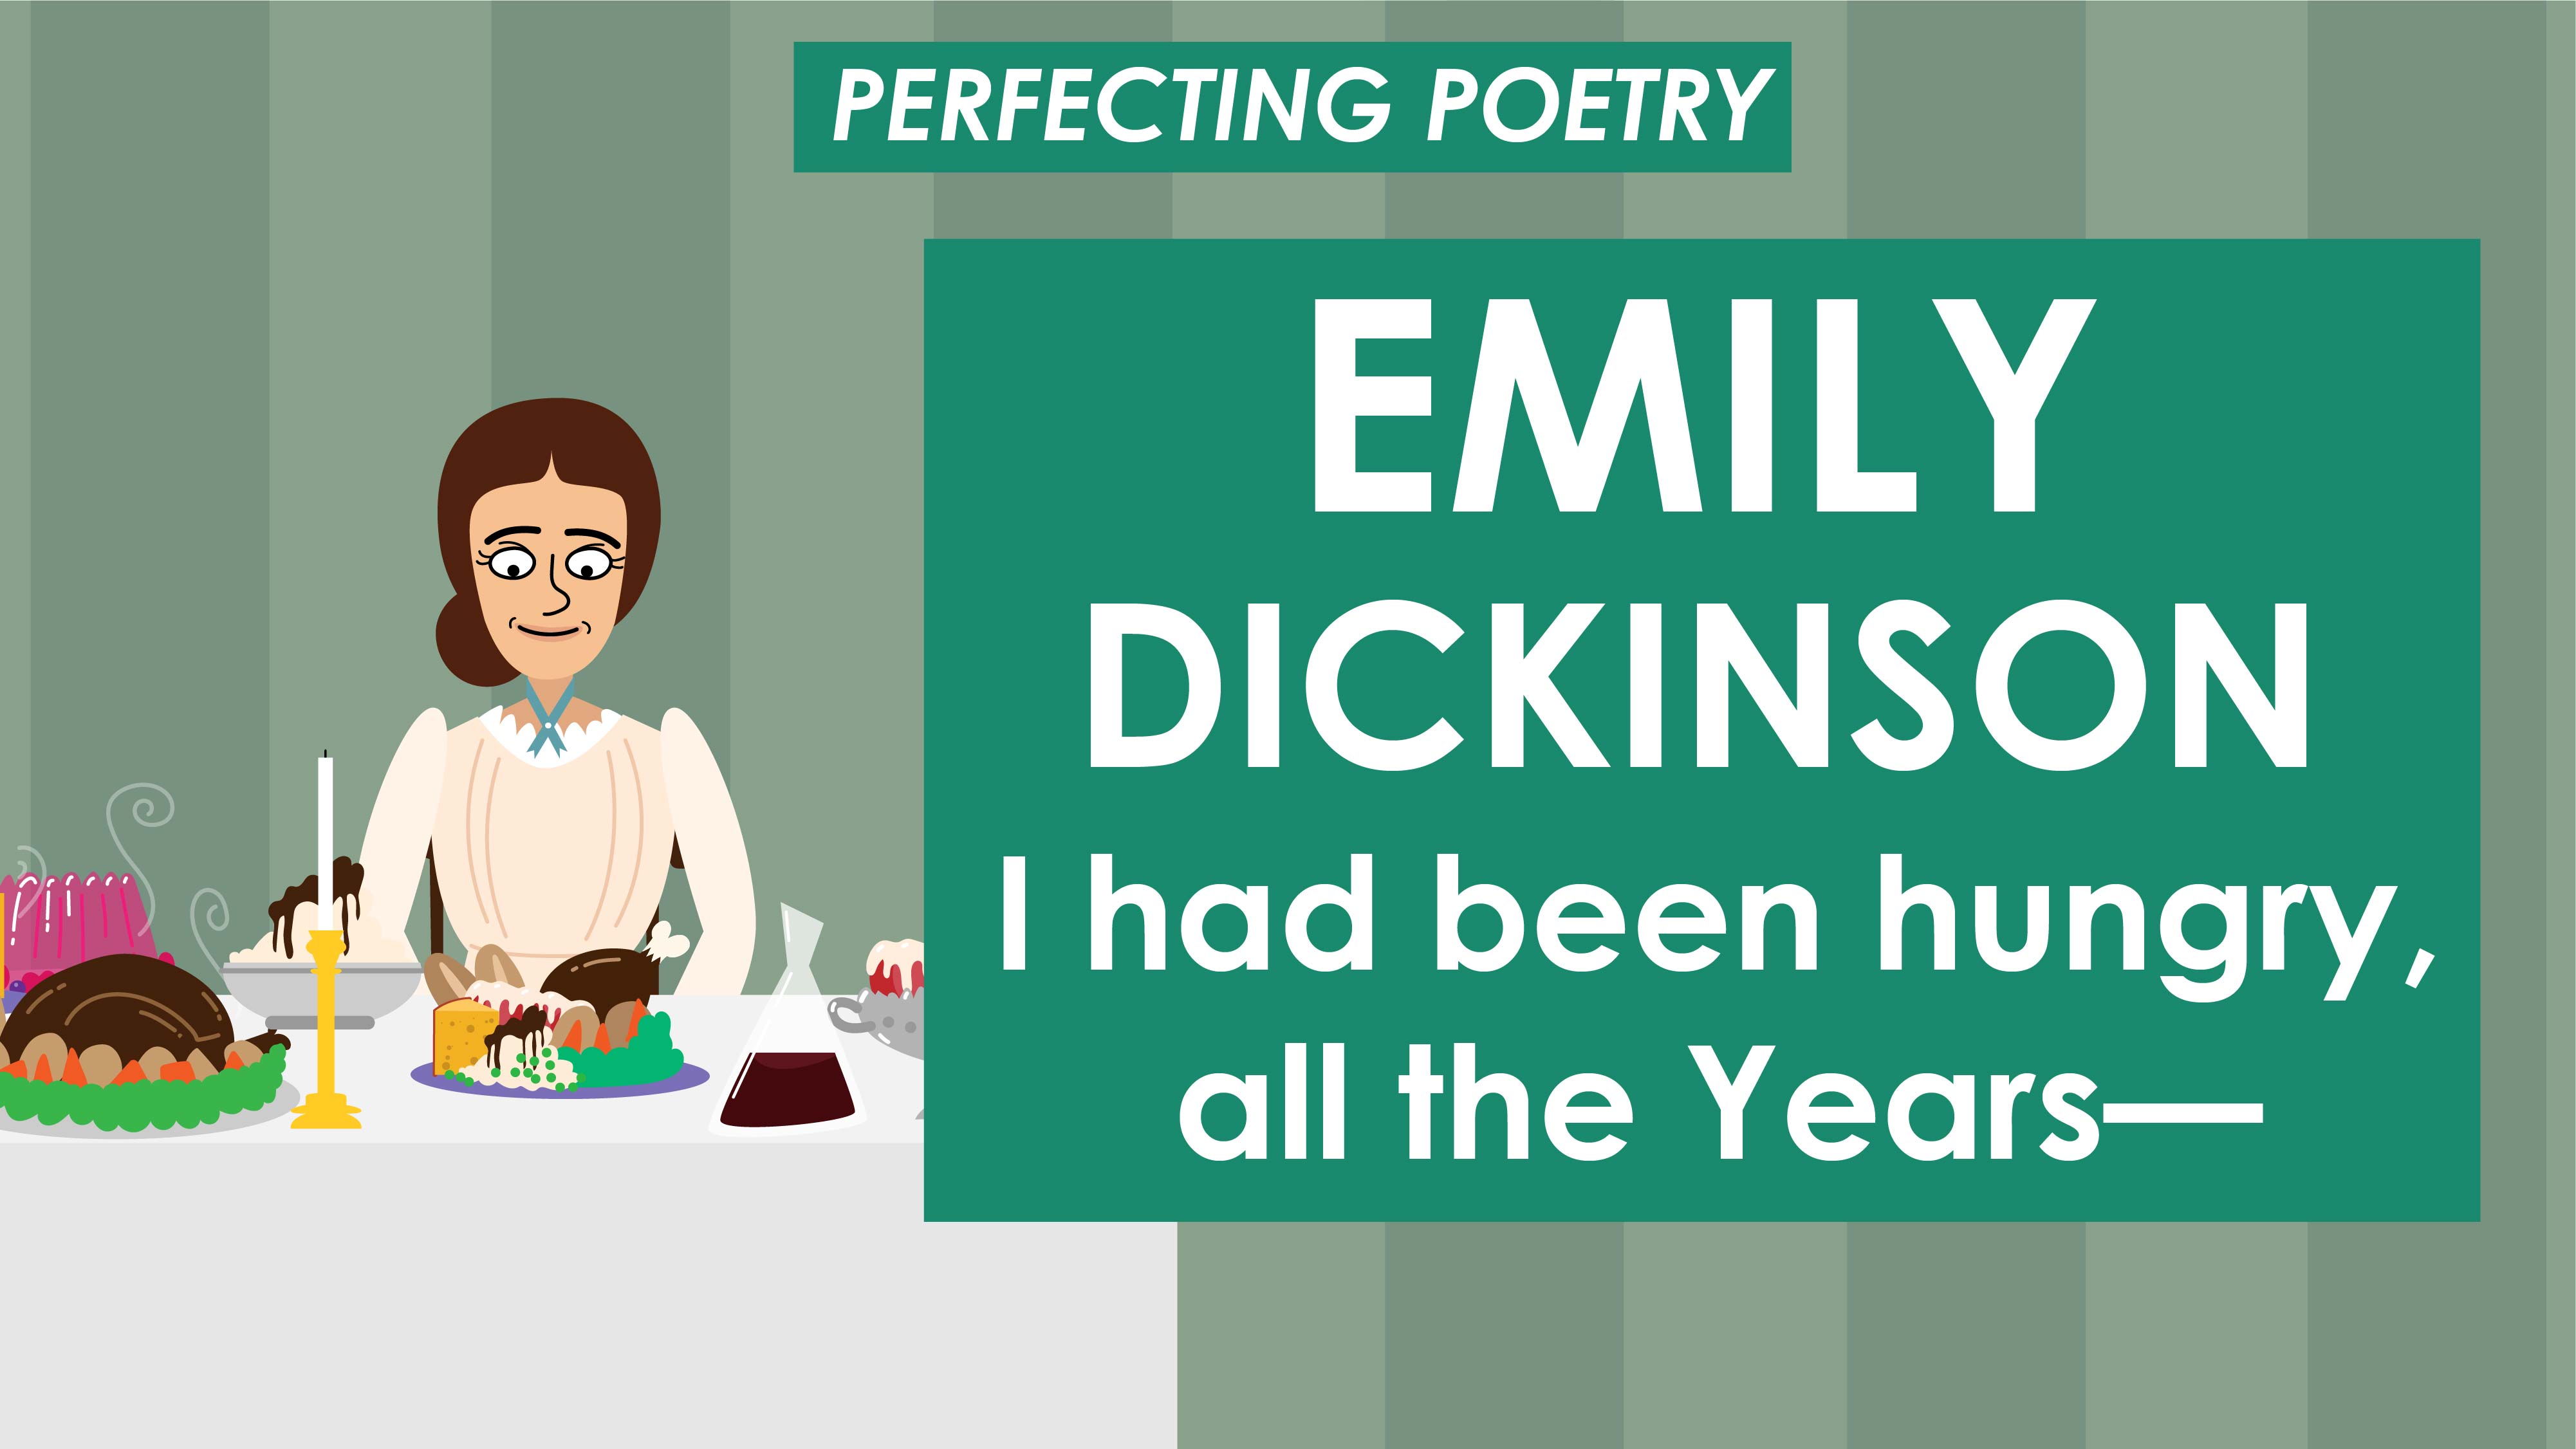 I had been hungry, all the Years - Emily Dickinson - Perfecting Poetry 